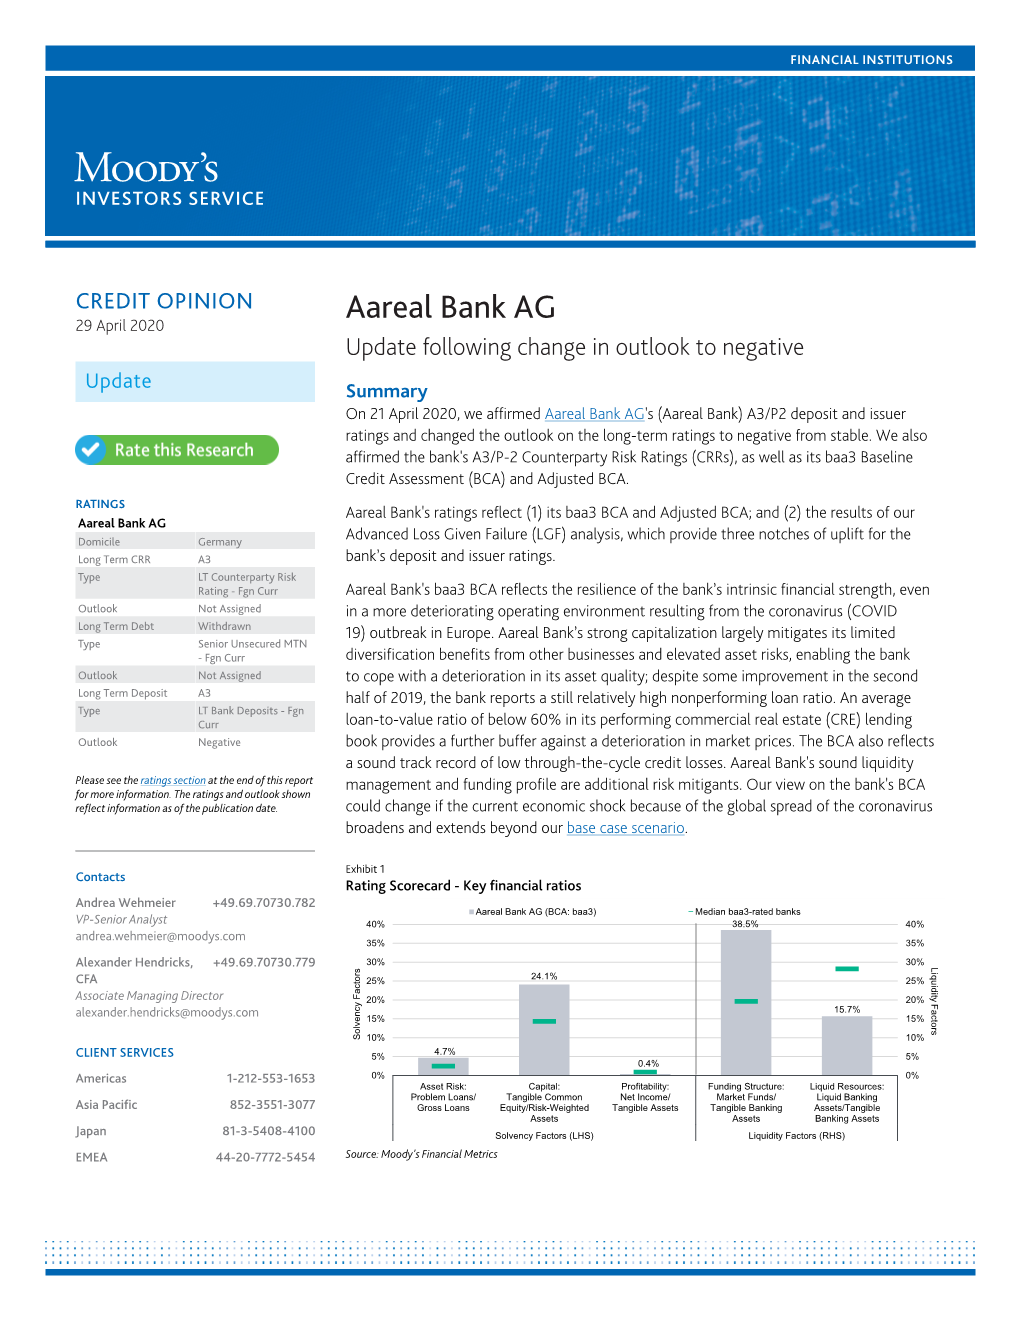 CREDIT OPINION Aareal Bank AG 29 April 2020 Update Following Change in Outlook to Negative